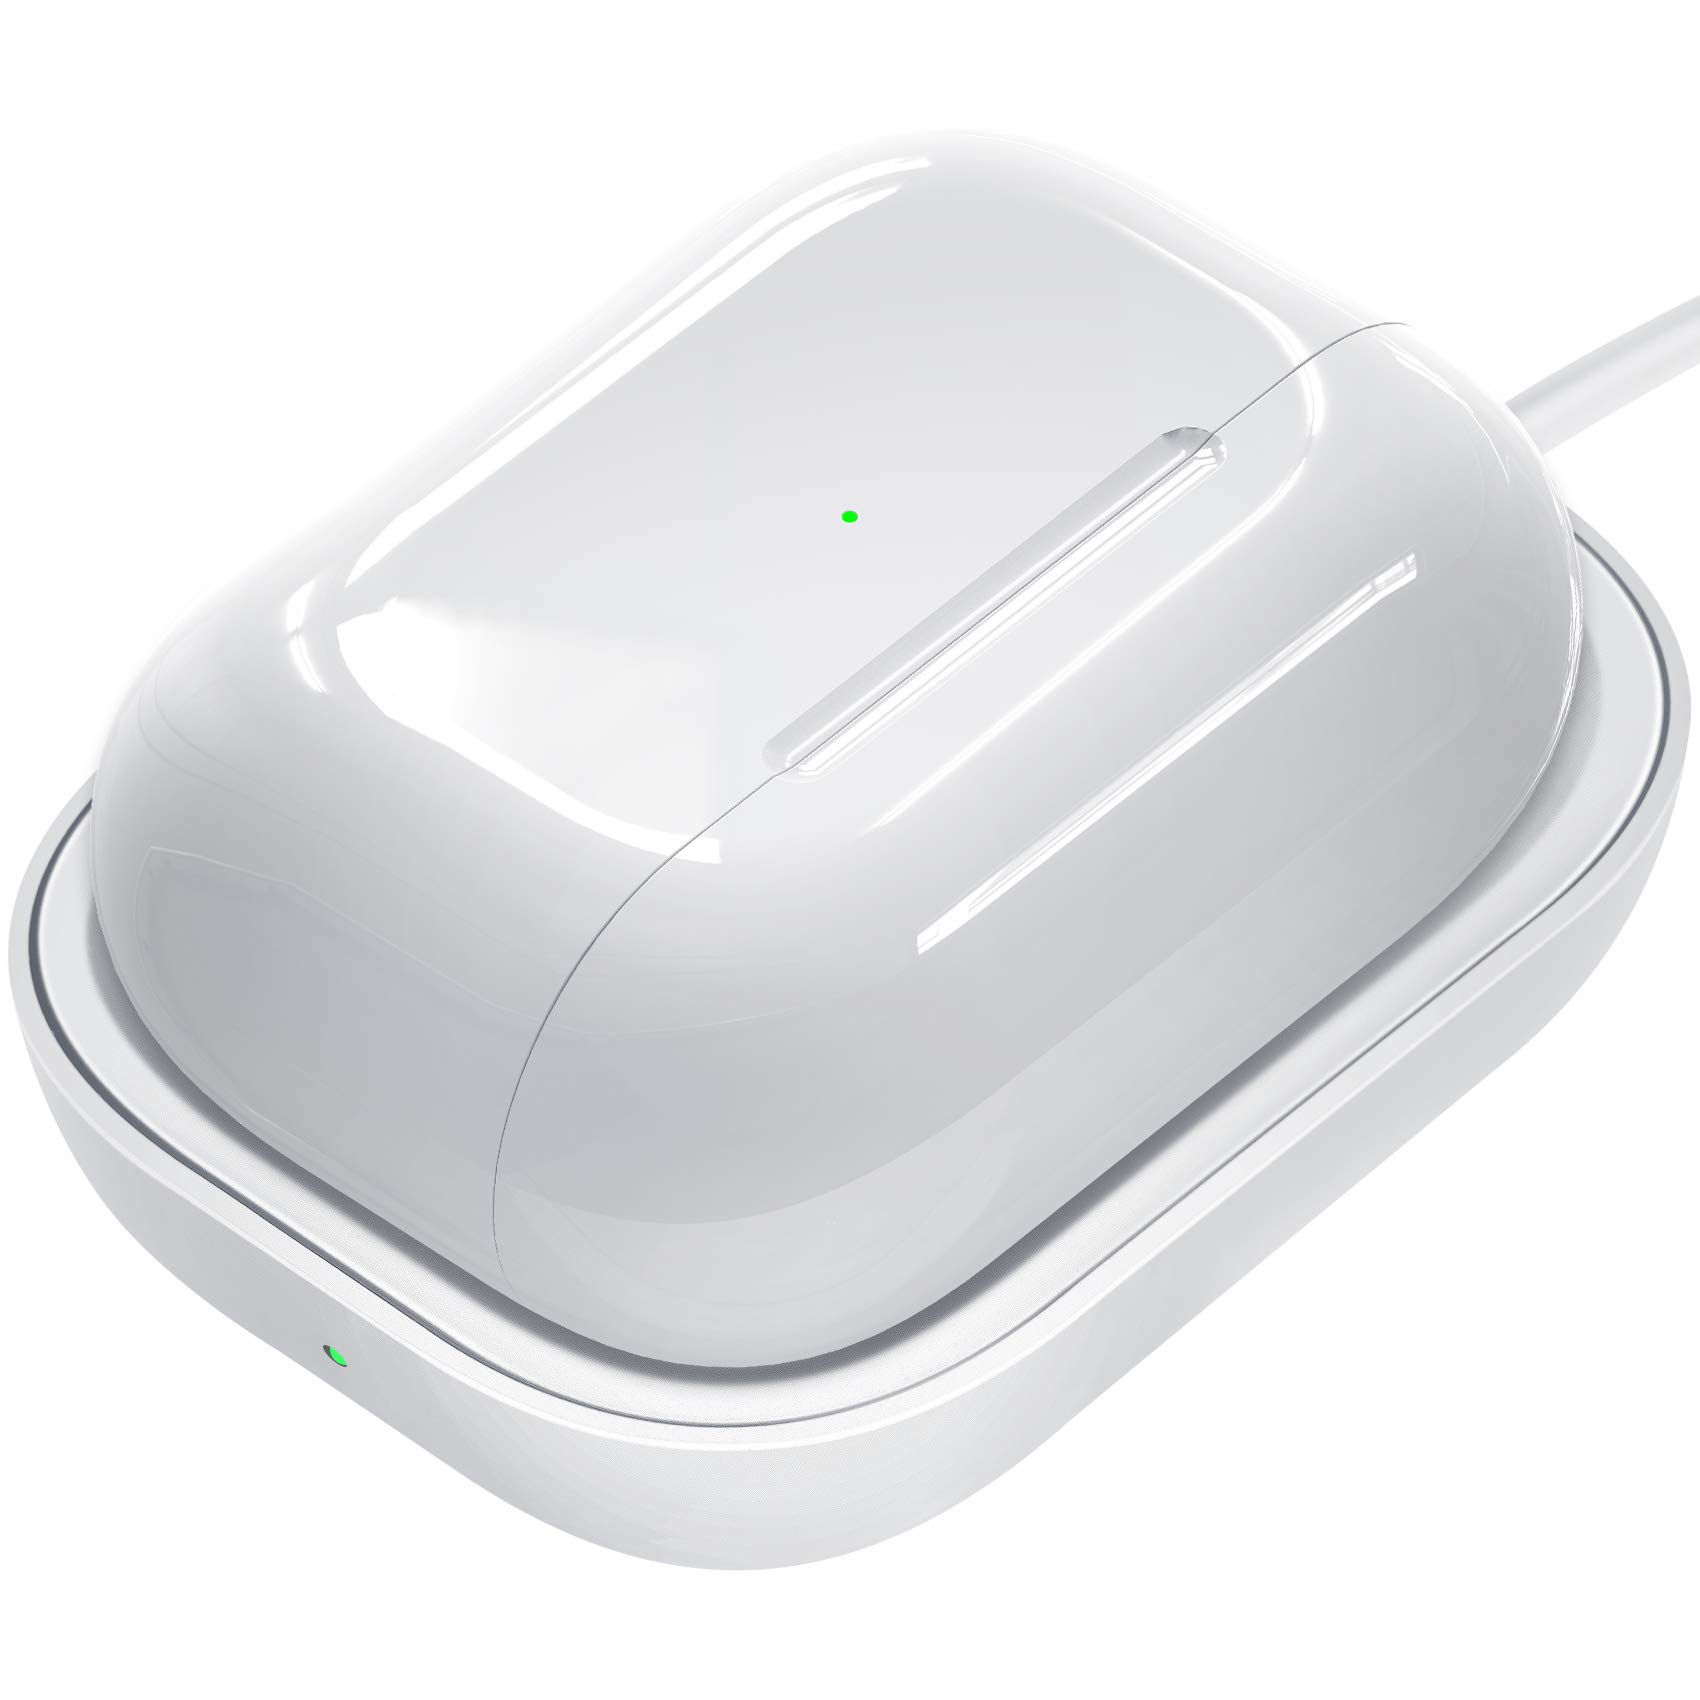 addressing-heat-concerns-airpods-heating-during-wireless-charging